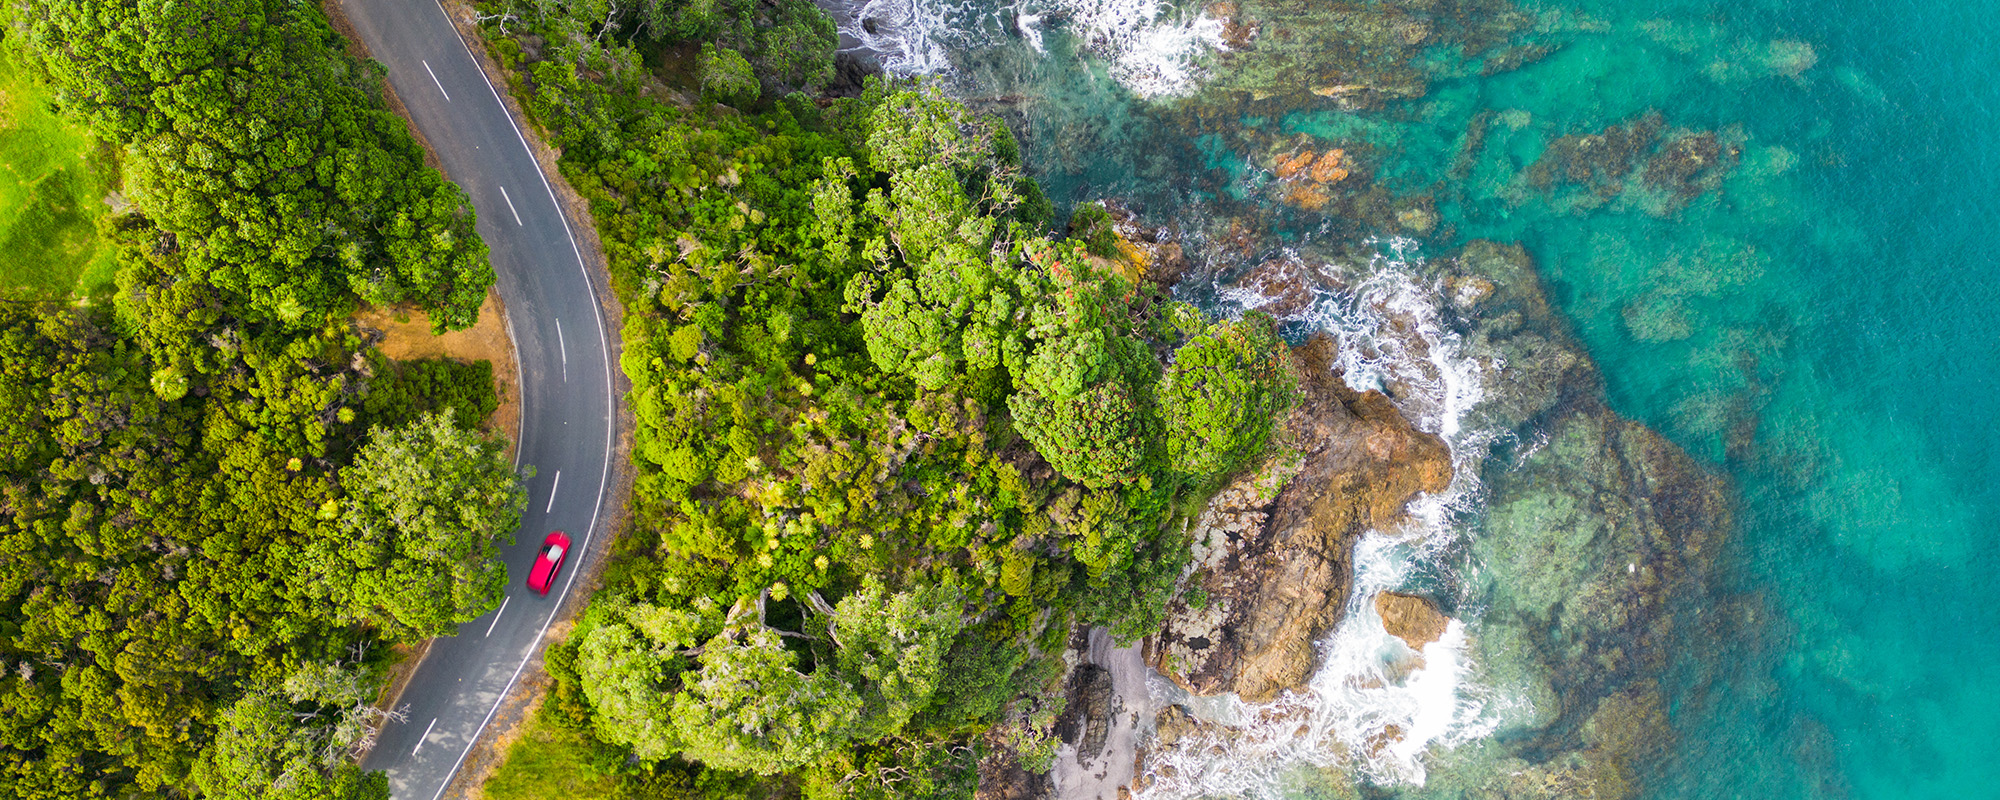 Drone photograph of a car driving on an ocean side road.